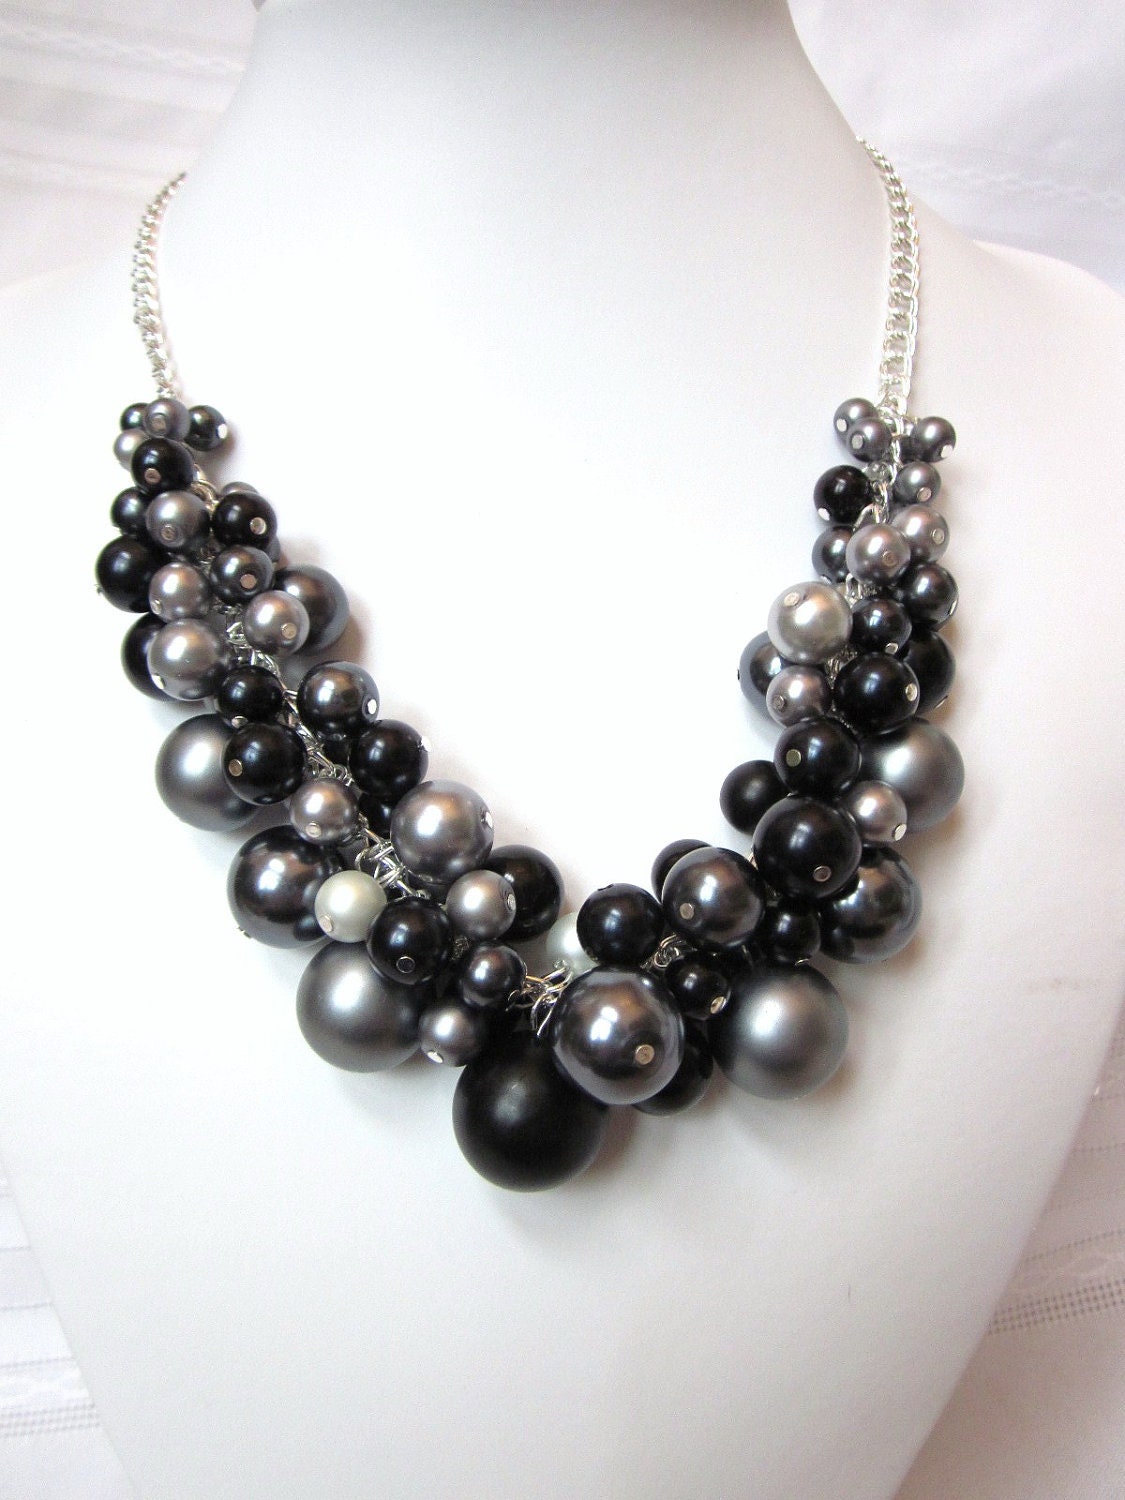 Pearl Cluster Necklace in Shades of Gray and Black (Matte Black Focal)-  Chunky, Choker, Bib, Necklace, Formal, Prom, Fun - CreationsbyCynthia1